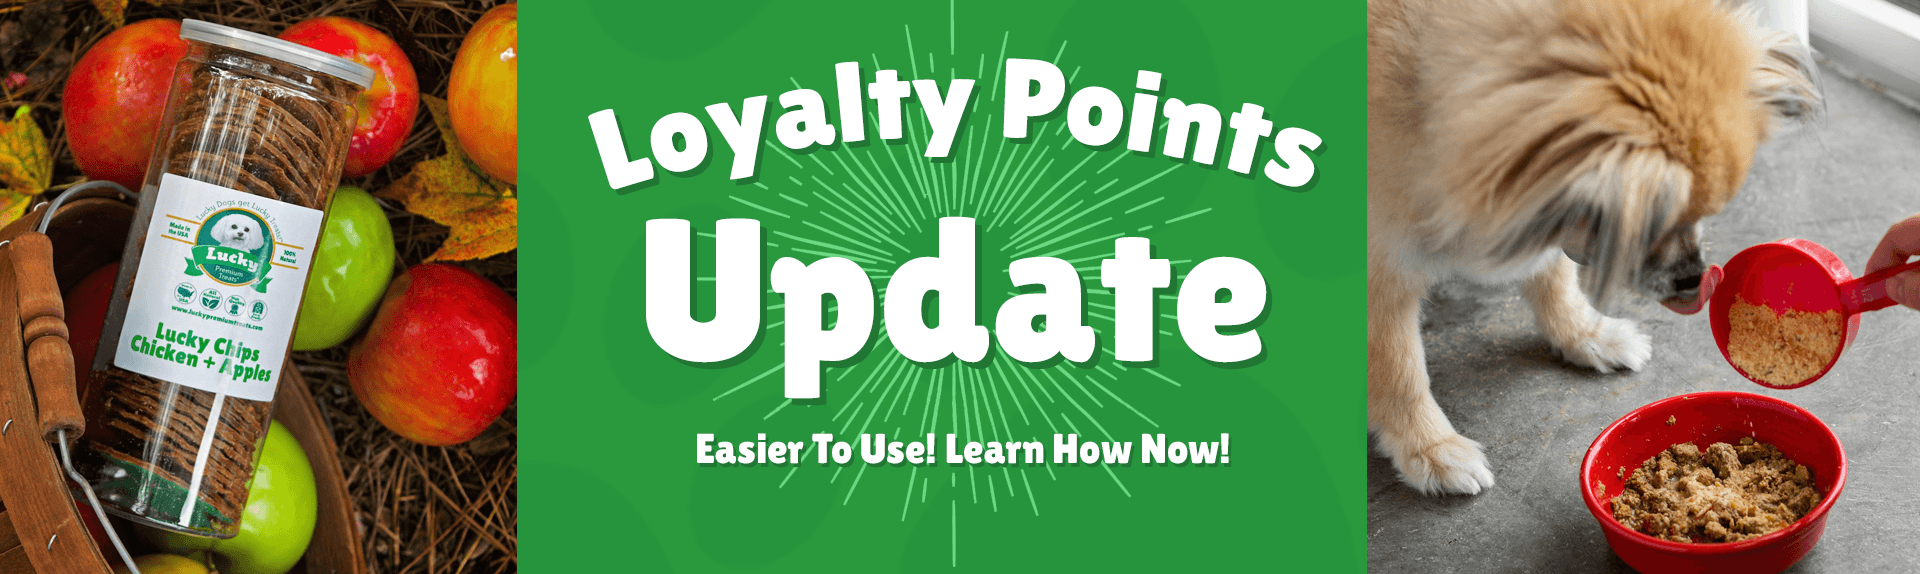 New Loyalty Points